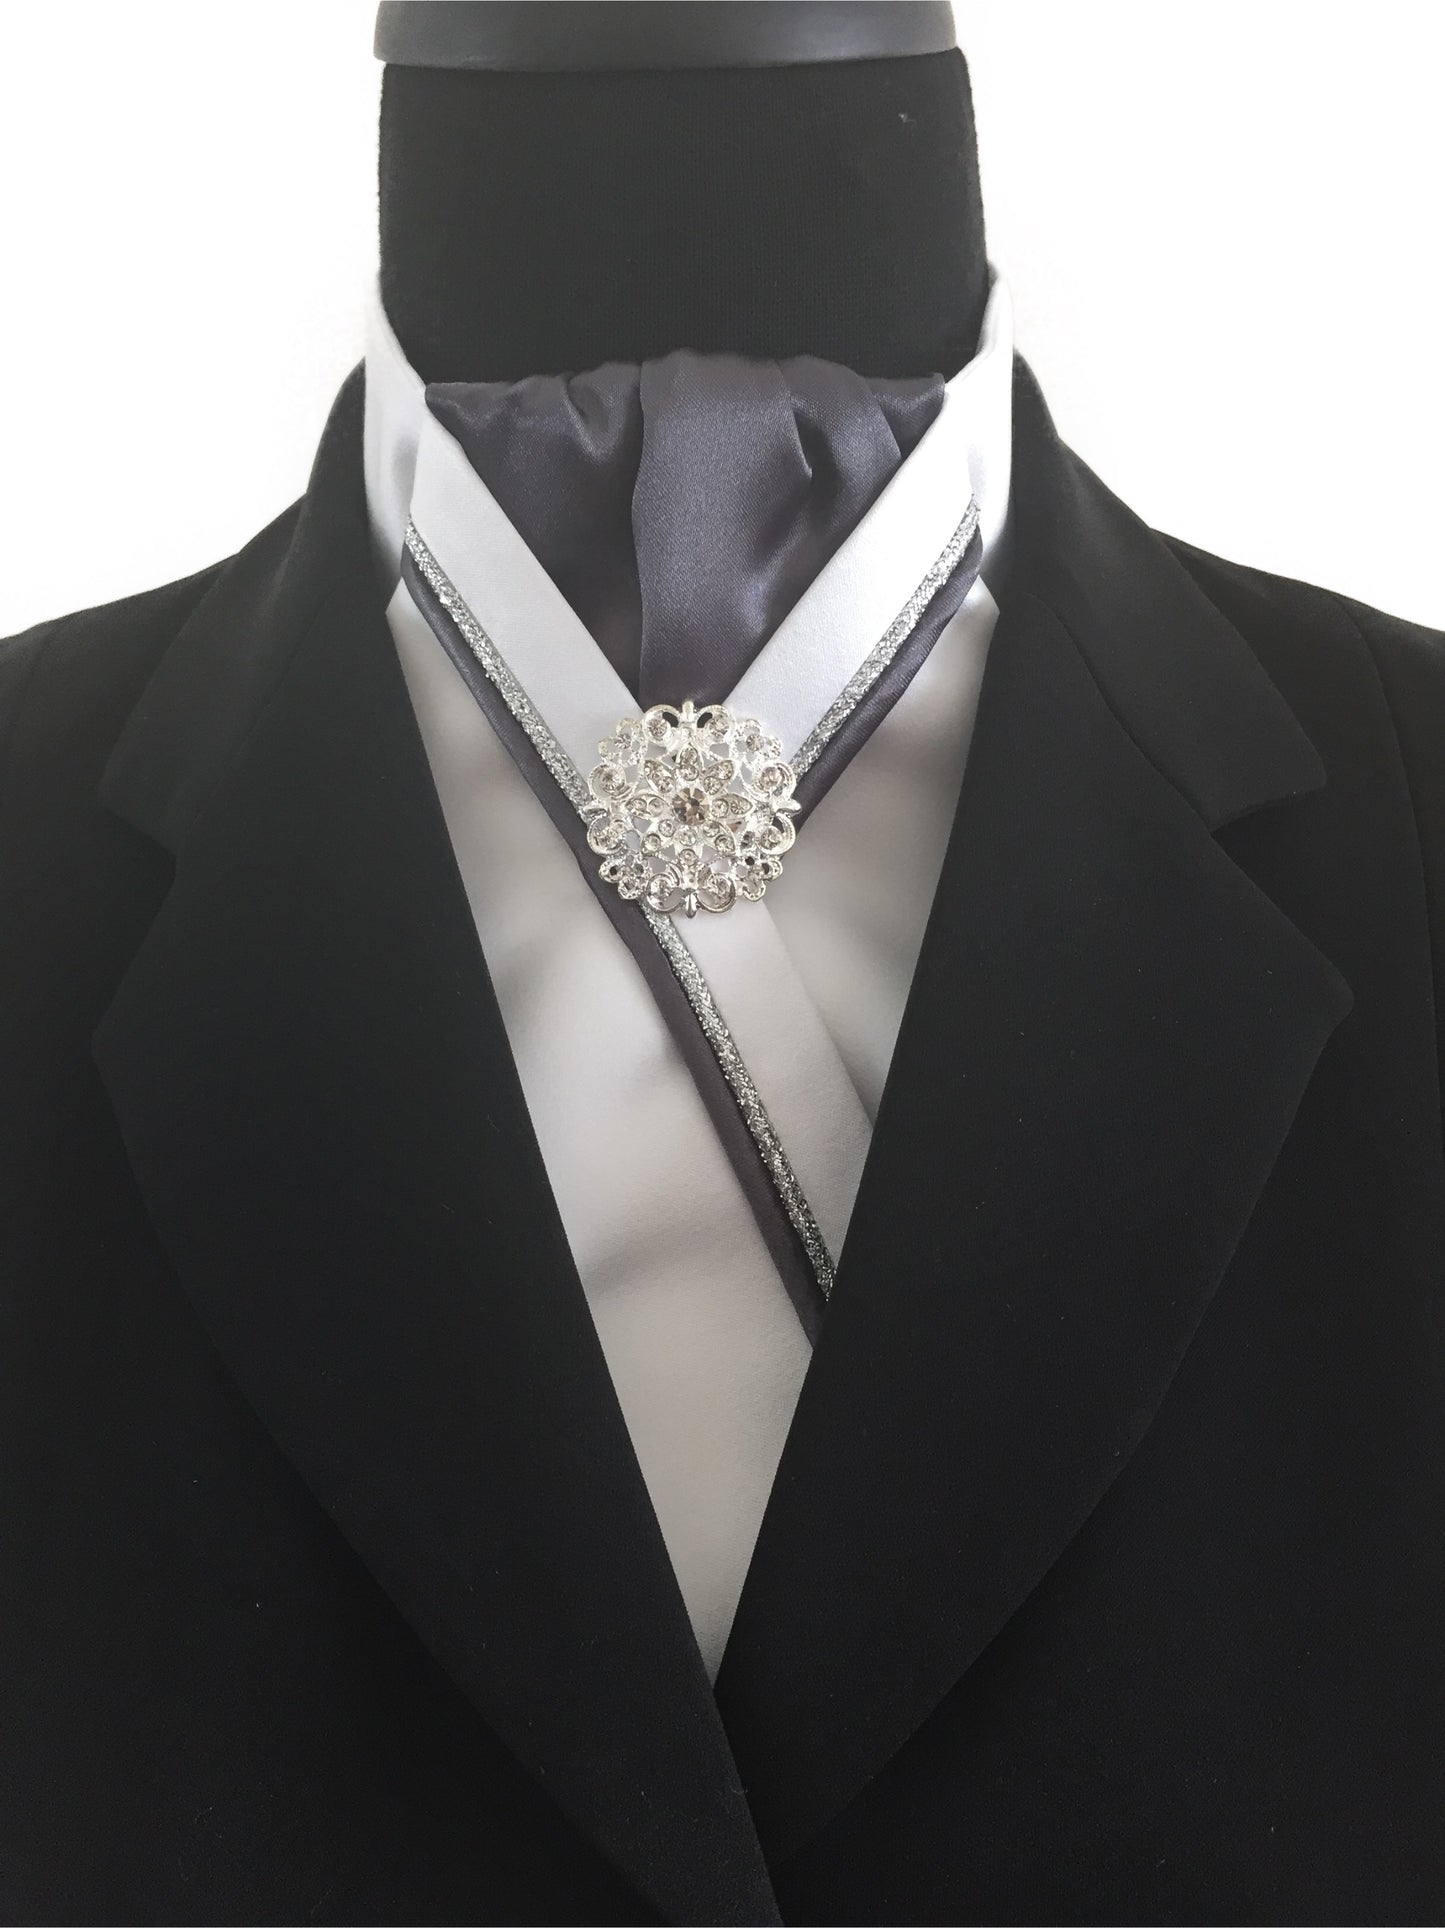 White Stock Tie with Gray Center and Gray & Silver Piping